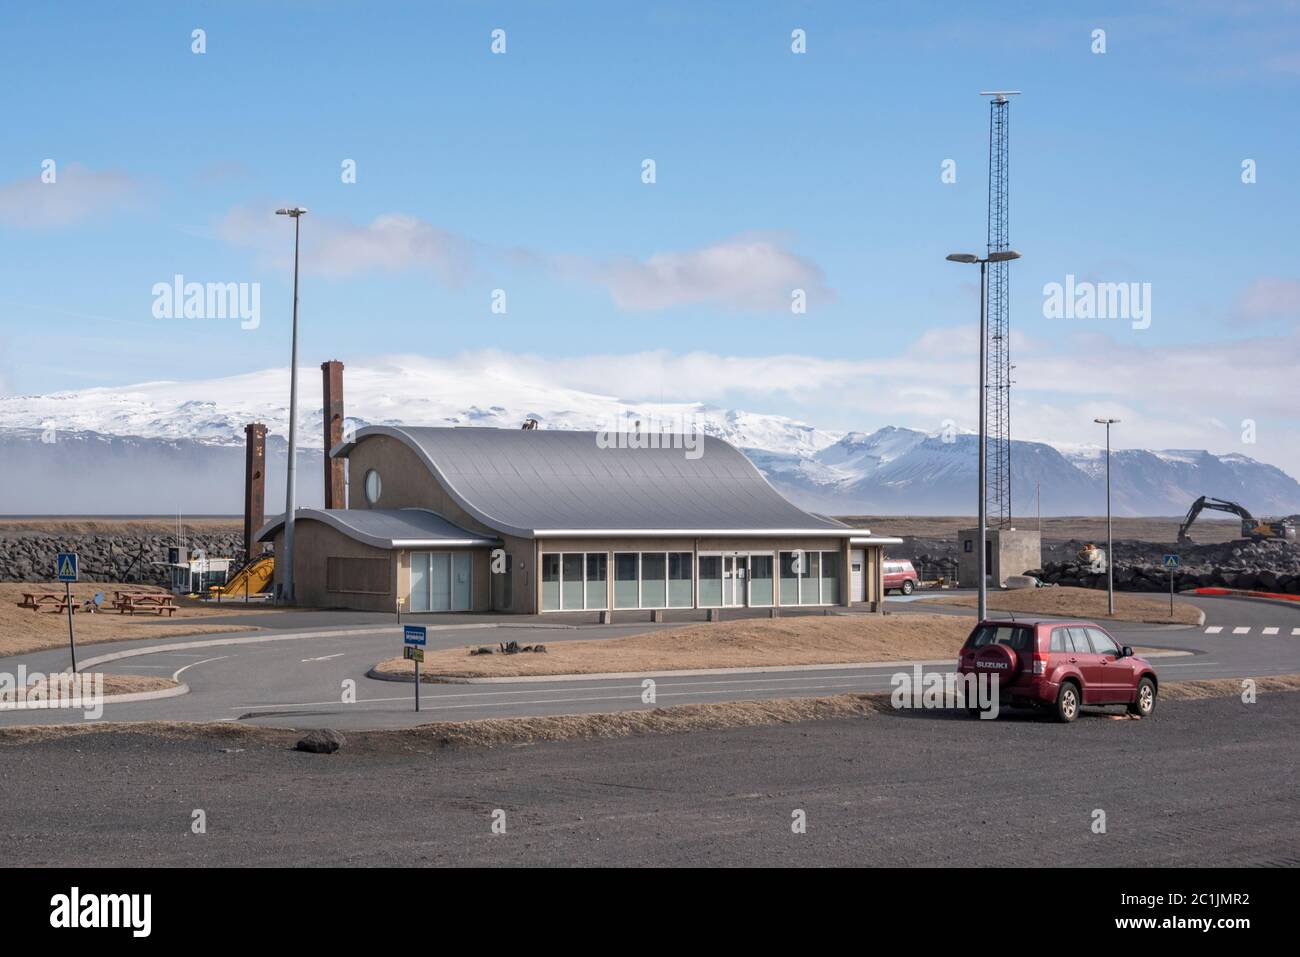 Terminal building at Landeyjahöfn, South Iceland. Ferries sail from here to the Westman Islands.A dust storm blows across beyond the building. Stock Photo